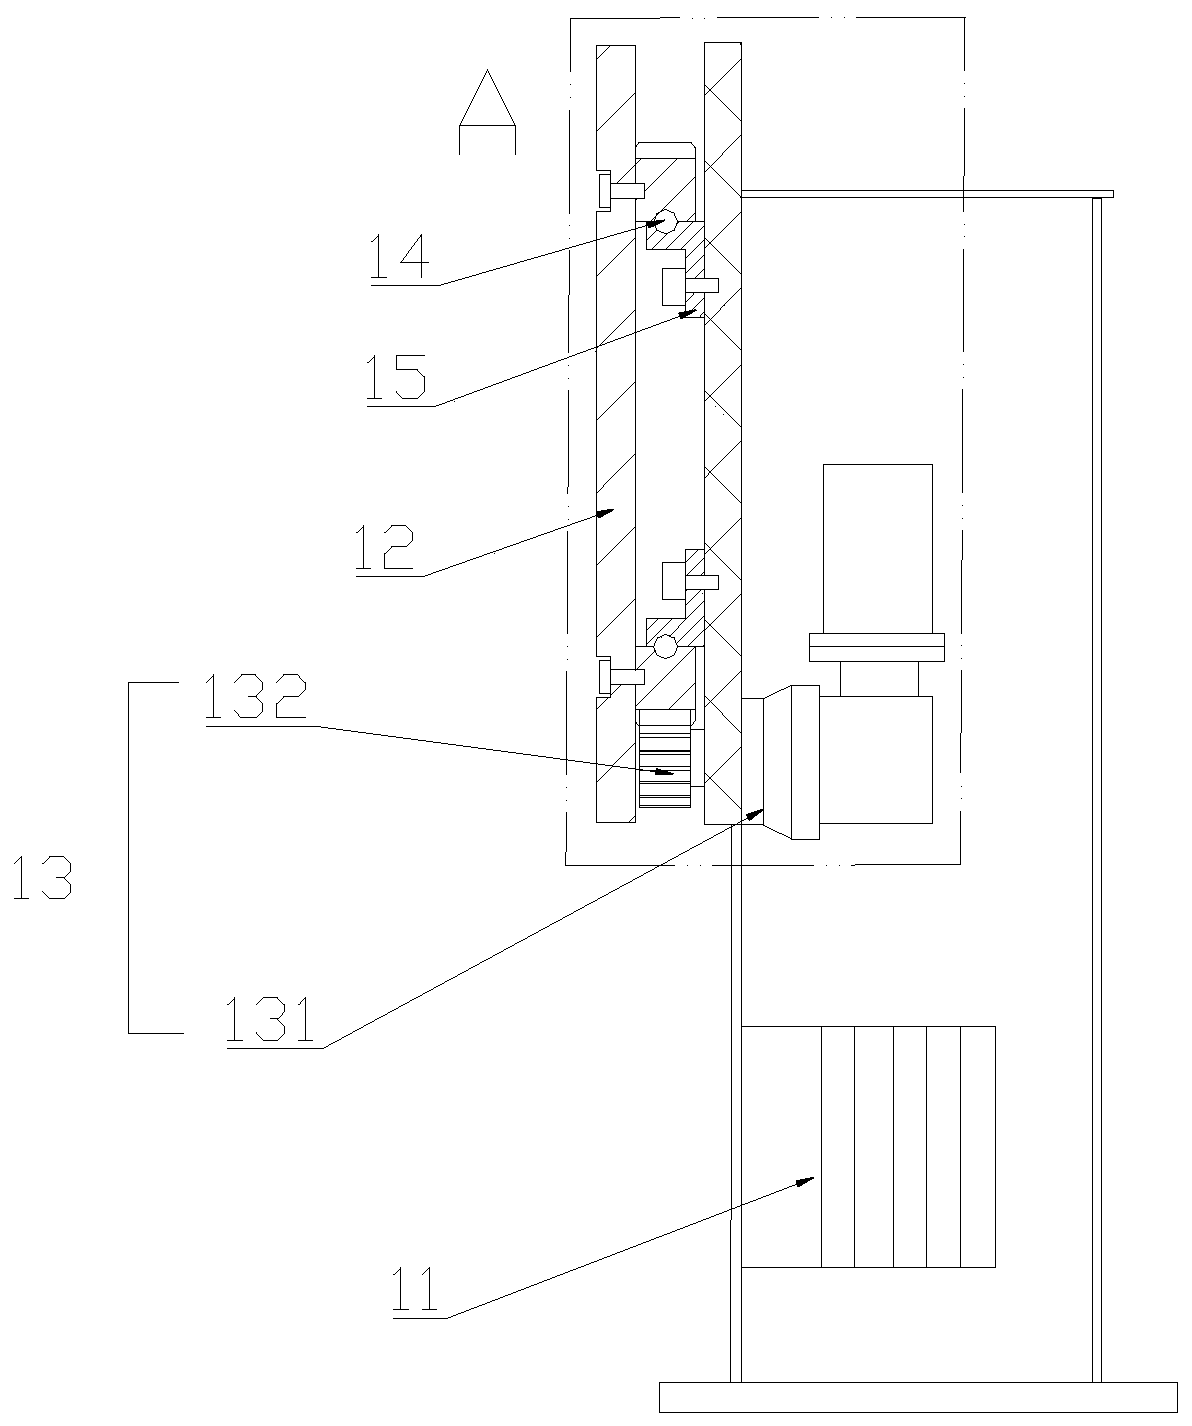 Position changing machine for assisting workpiece processing